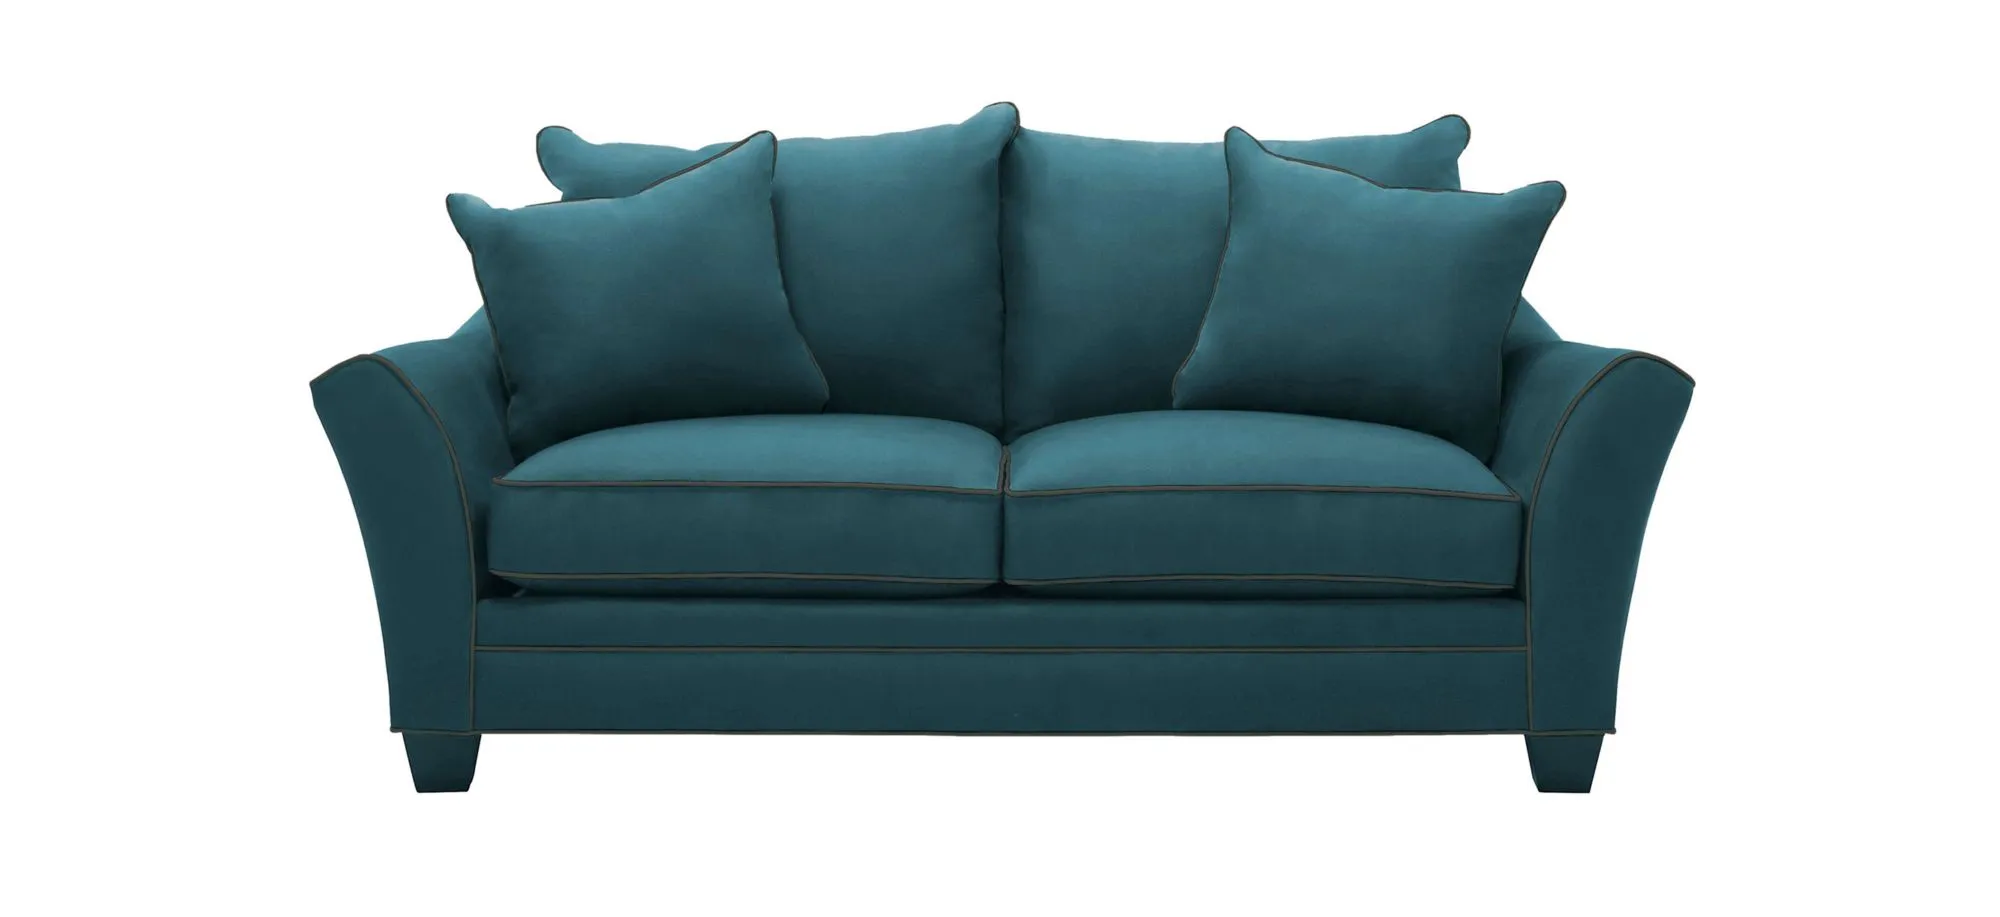 Briarwood Apartment Sofa in Suede So Soft Indigo/Mineral by H.M. Richards